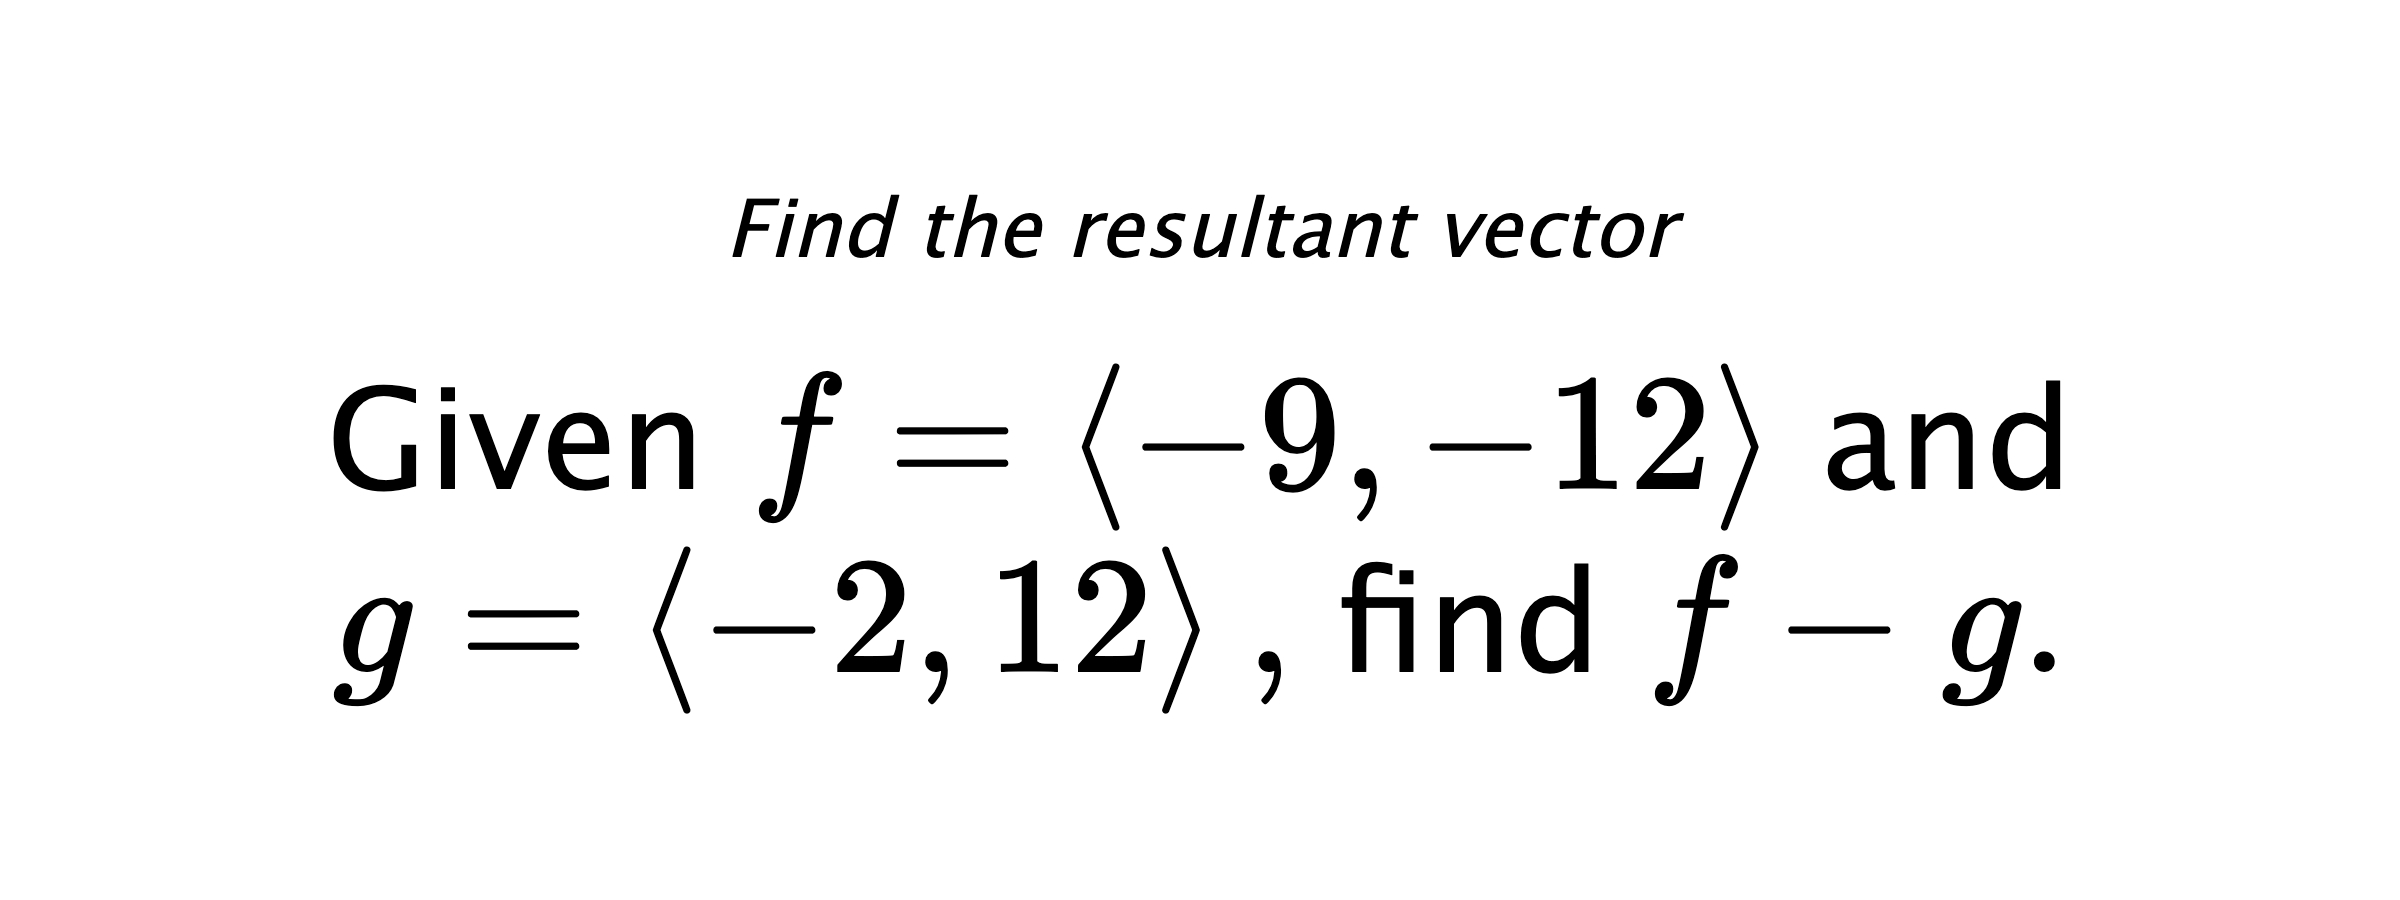 Find the resultant vector Given $ f = \left< -9,-12 \right> $ and $ g = \left< -2,12 \right> ,$ find $ f-g .$